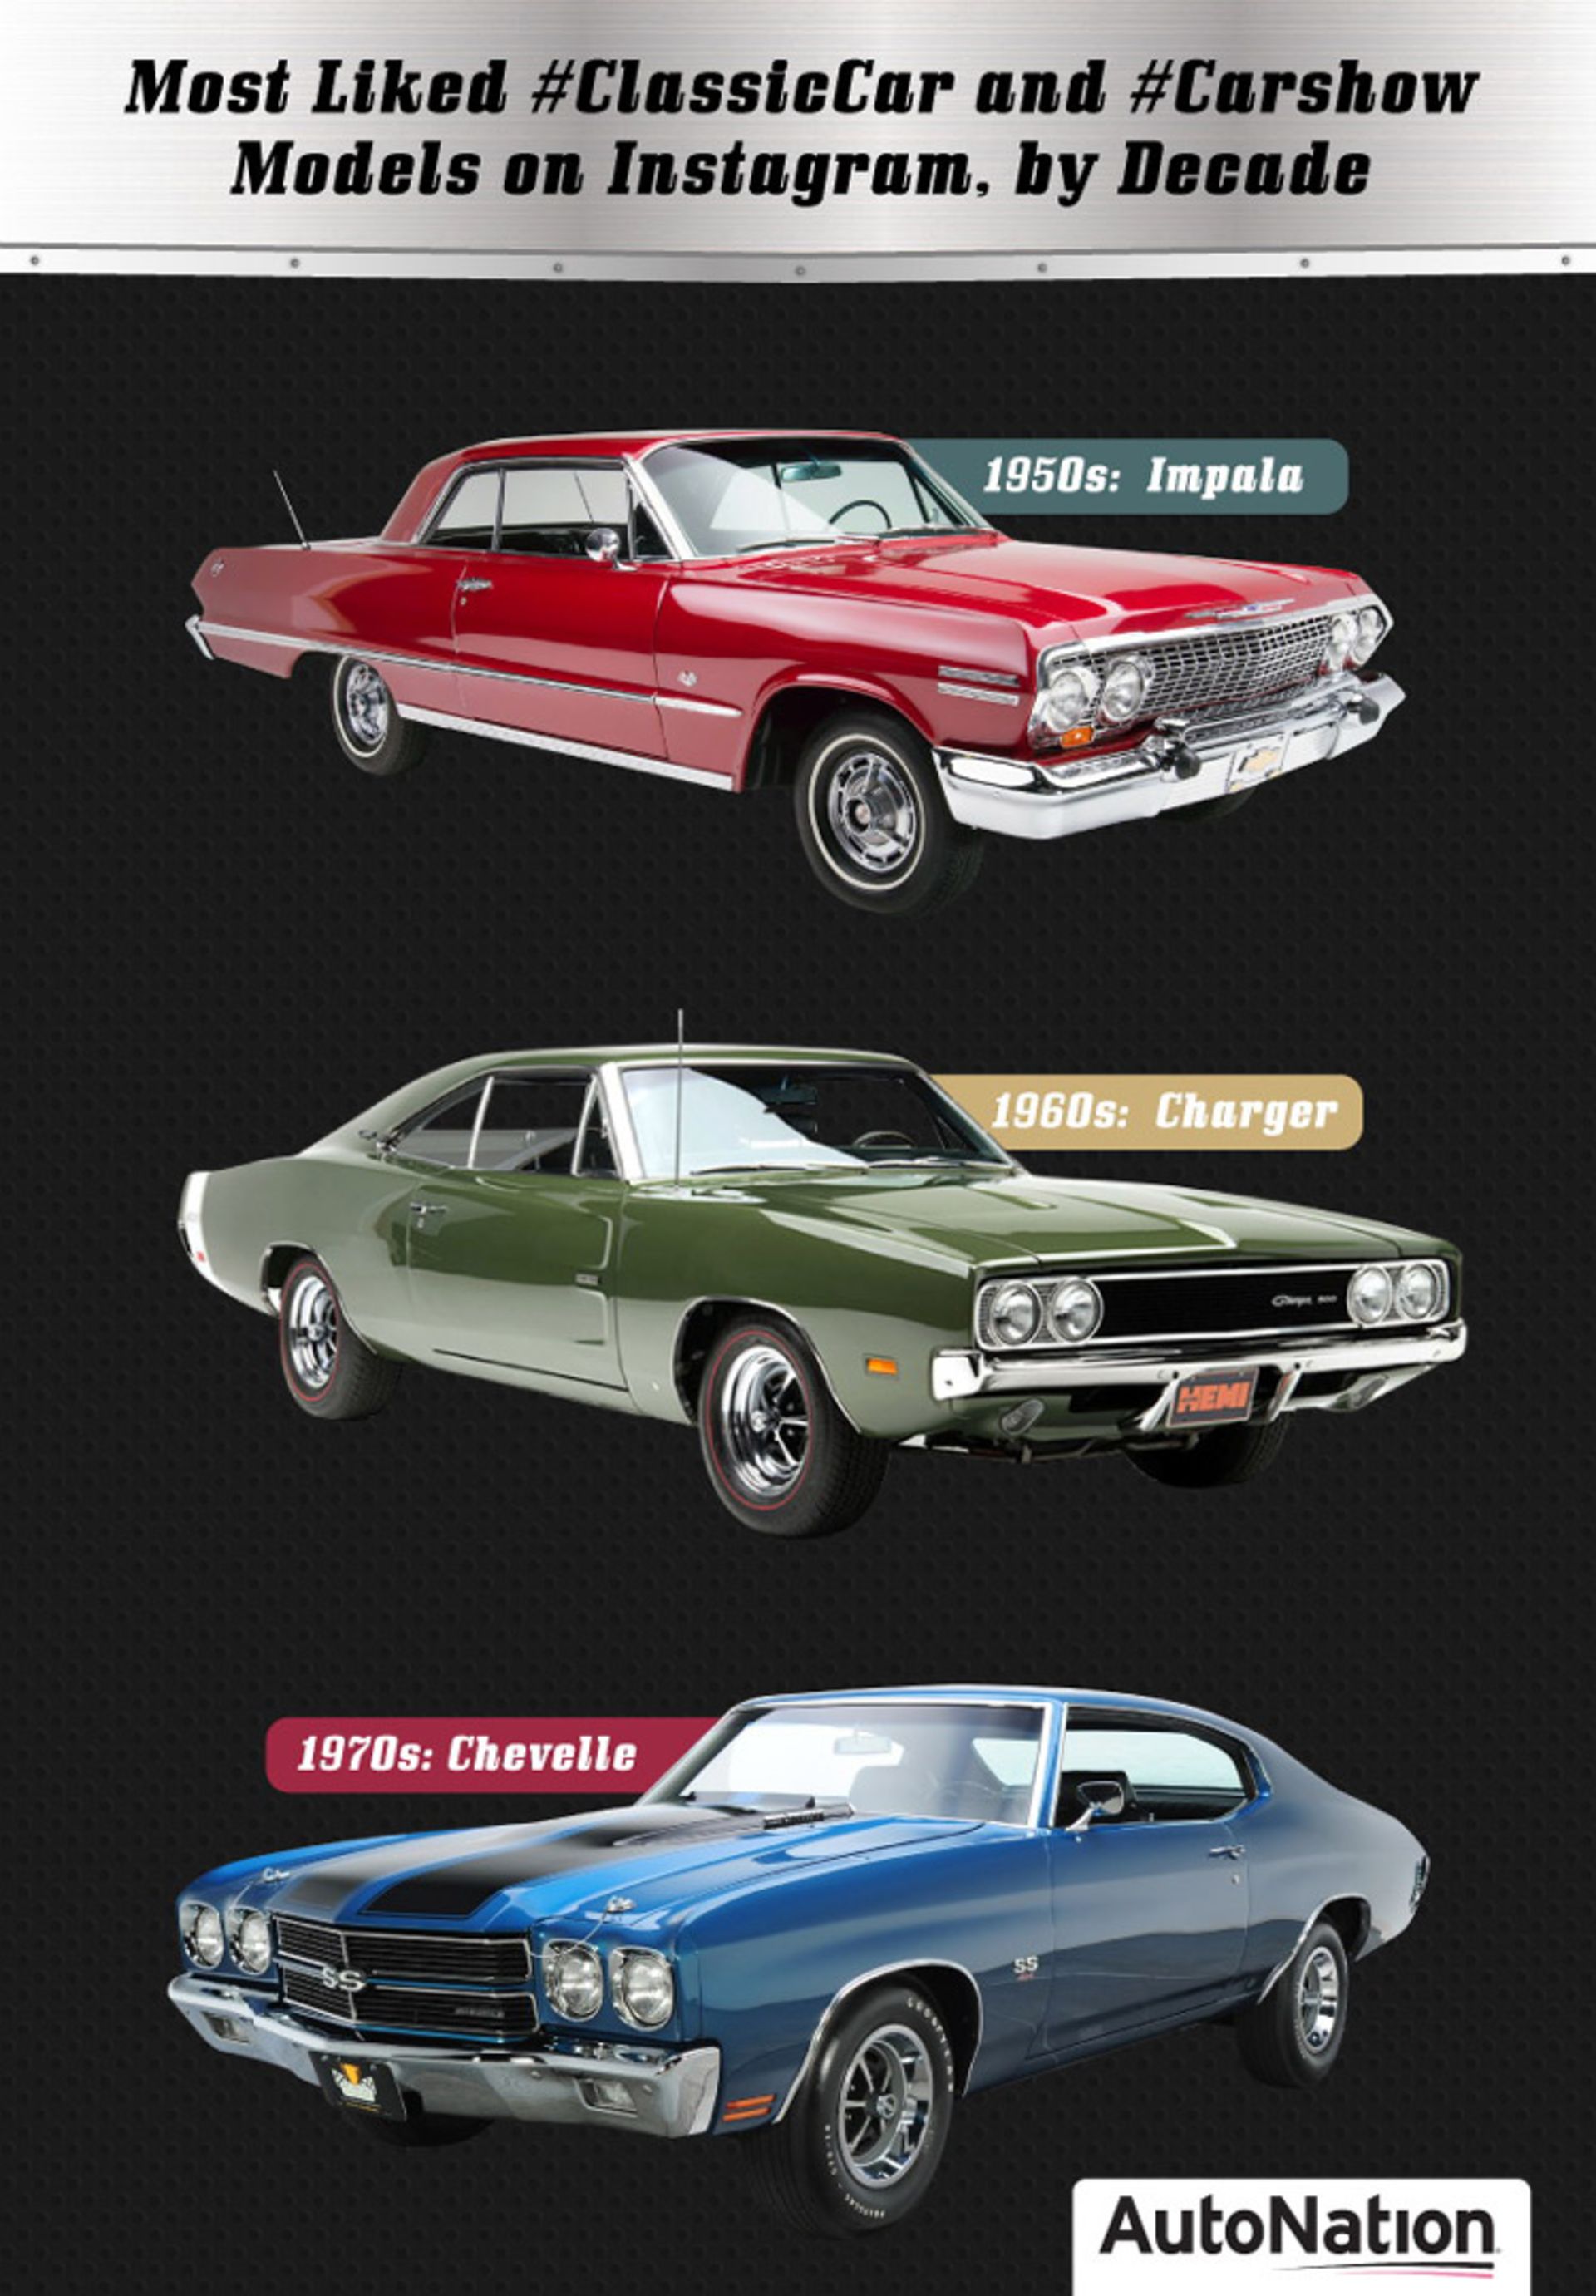 Most Mentioned Classic Cars on Instagram